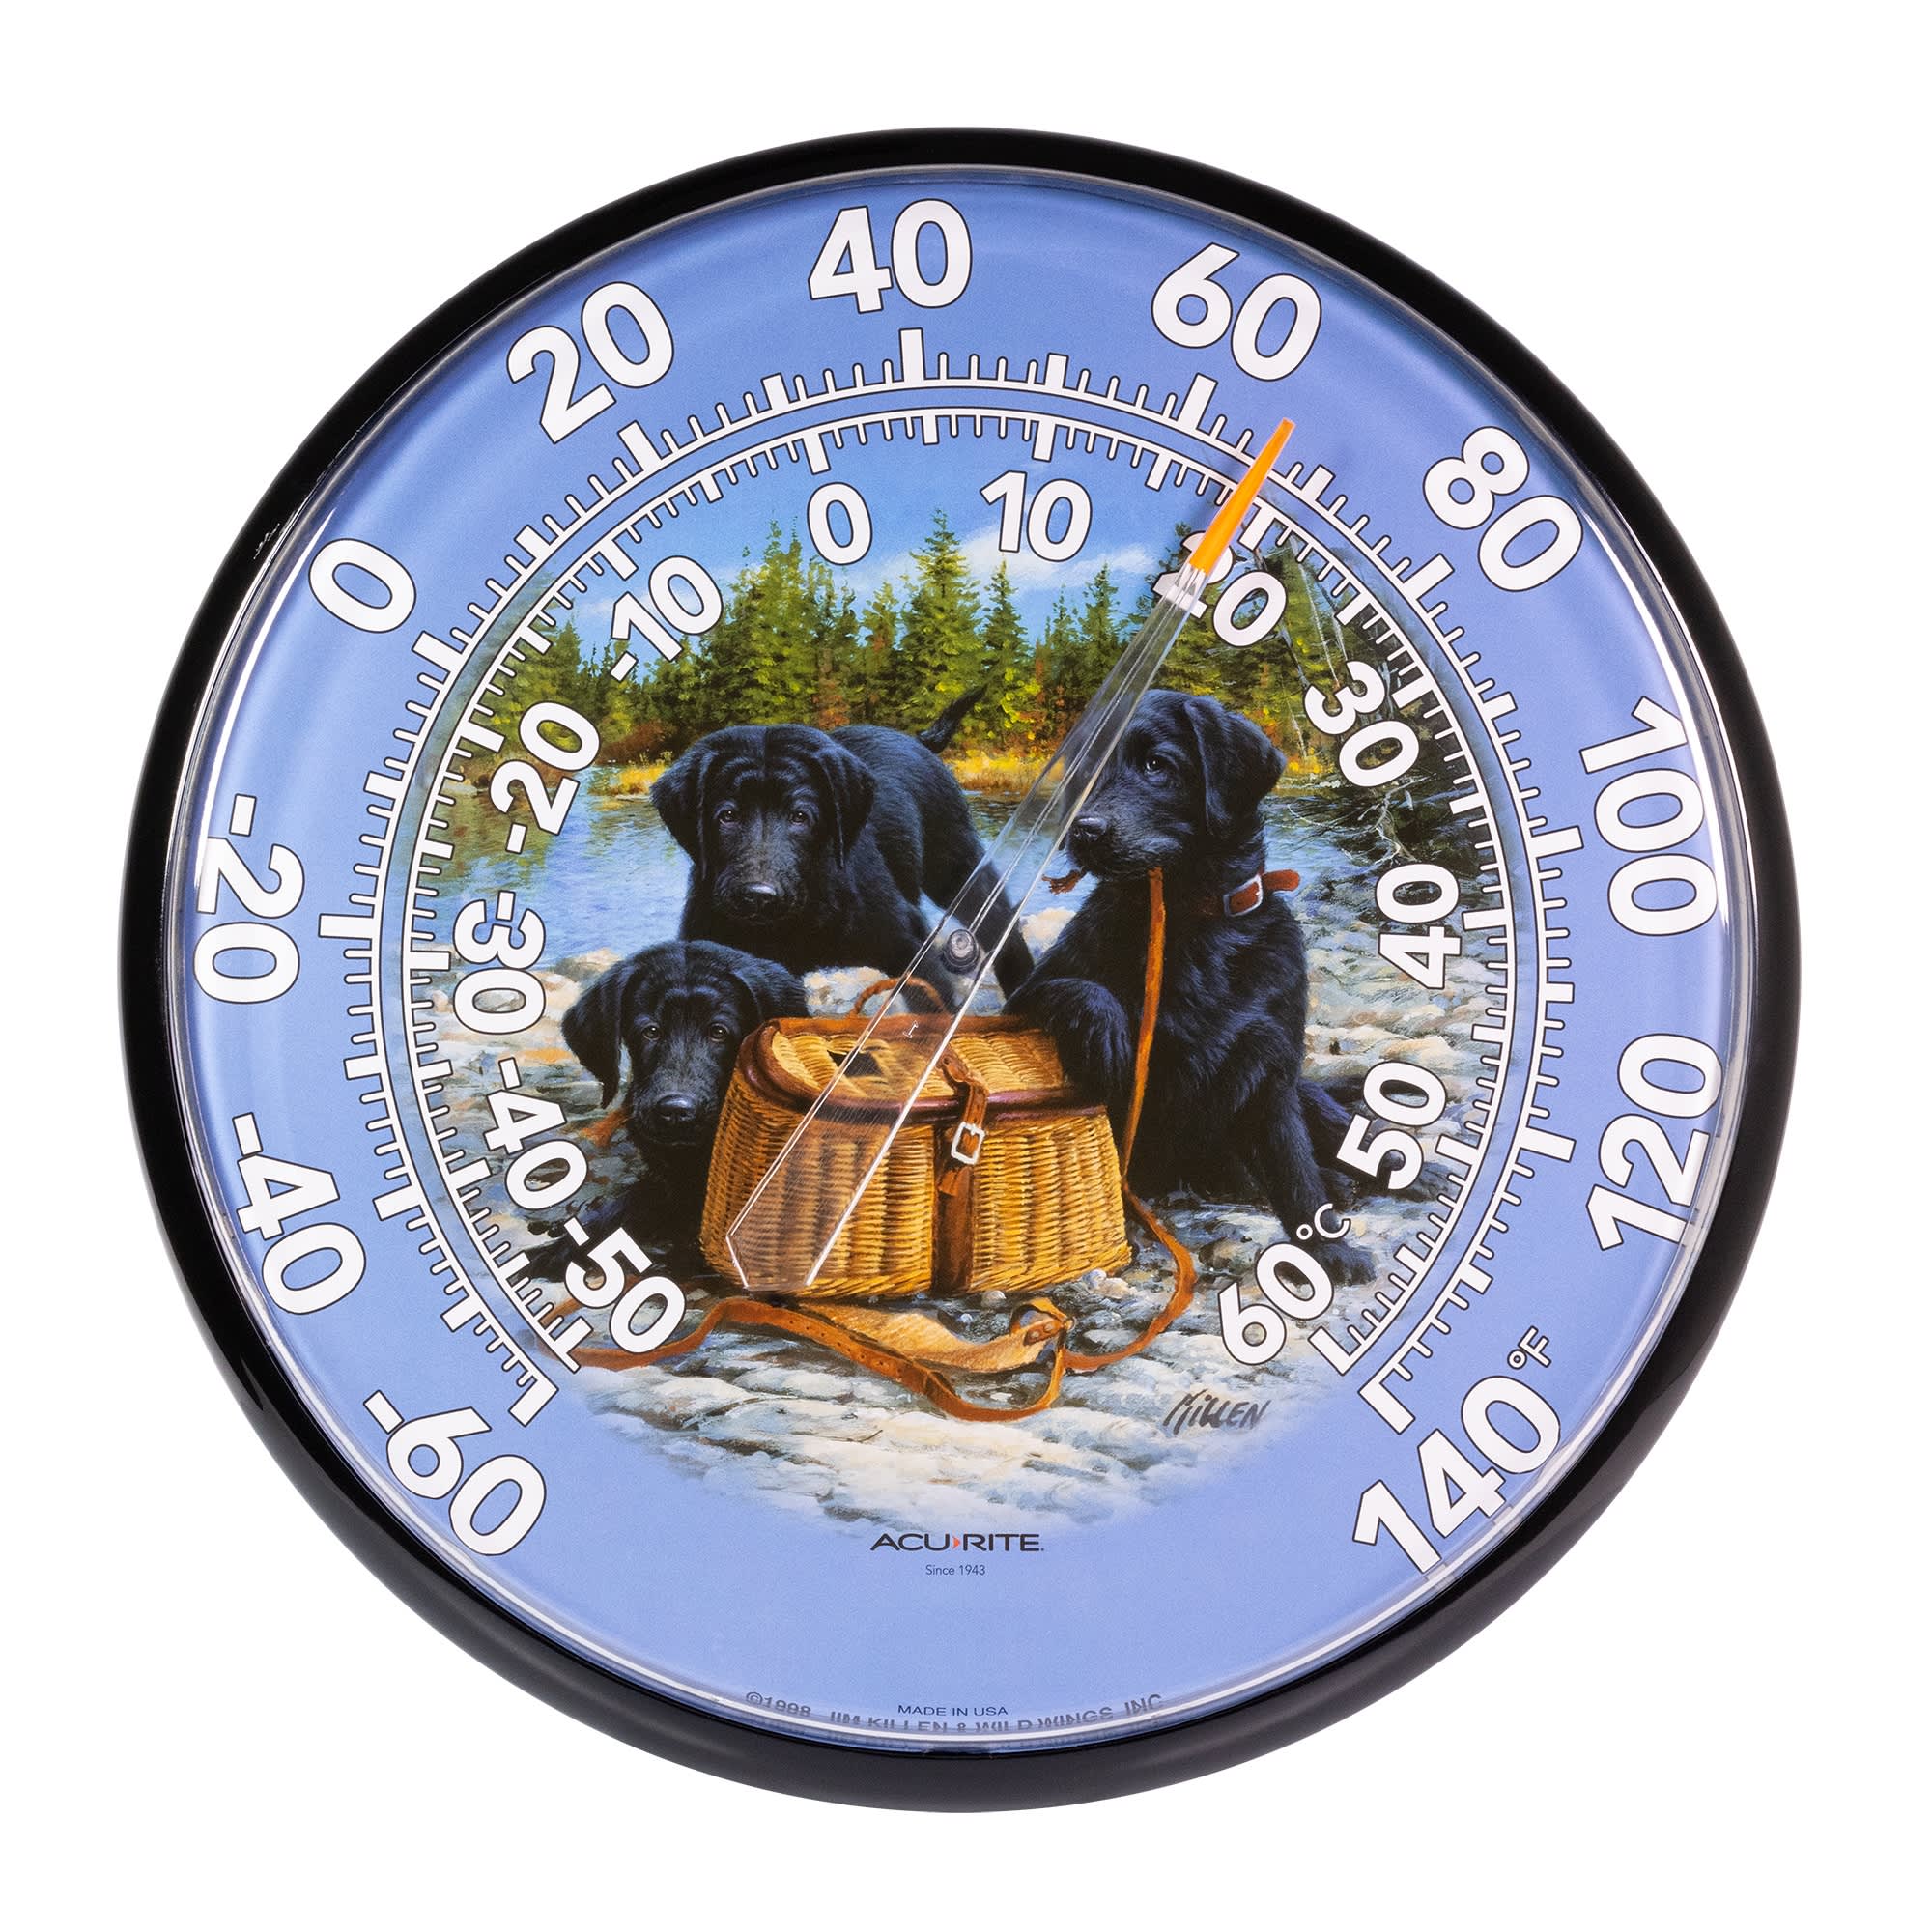 AcuRite® 12.5-Inch Indoor/Outdoor Dial Thermometer Feat. Black Labrador Puppies 